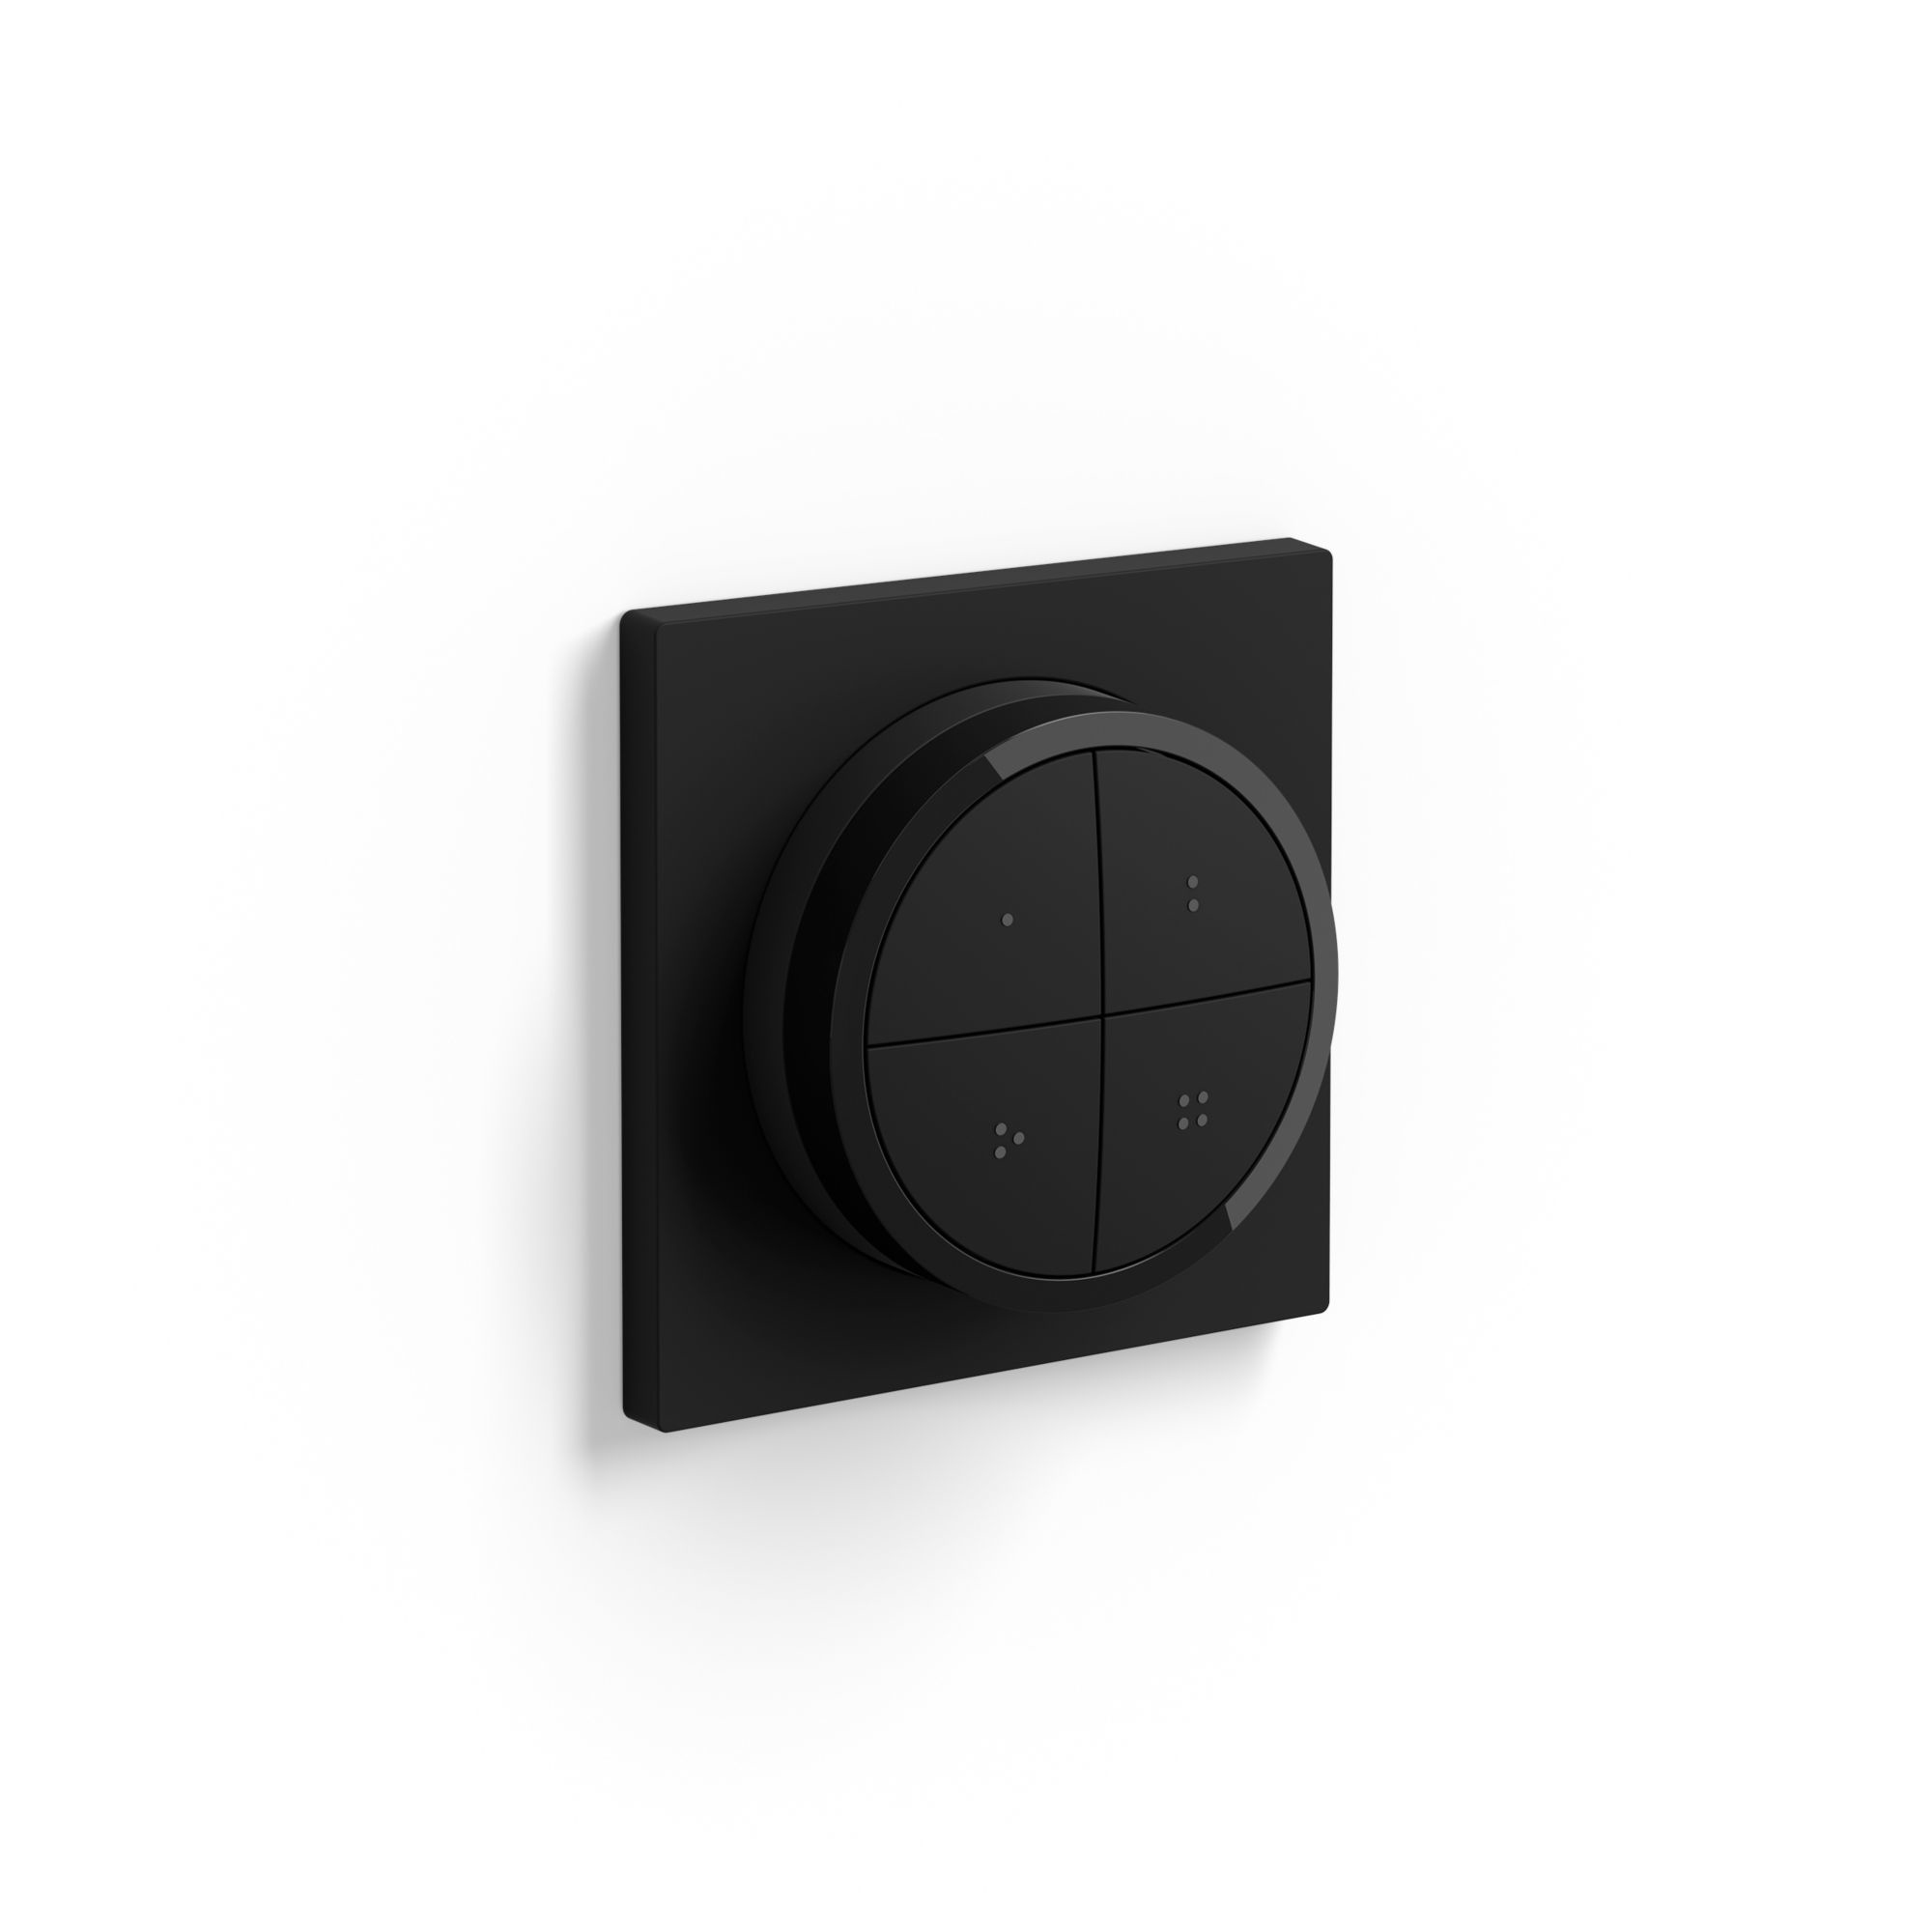 Philips Tap dial switch